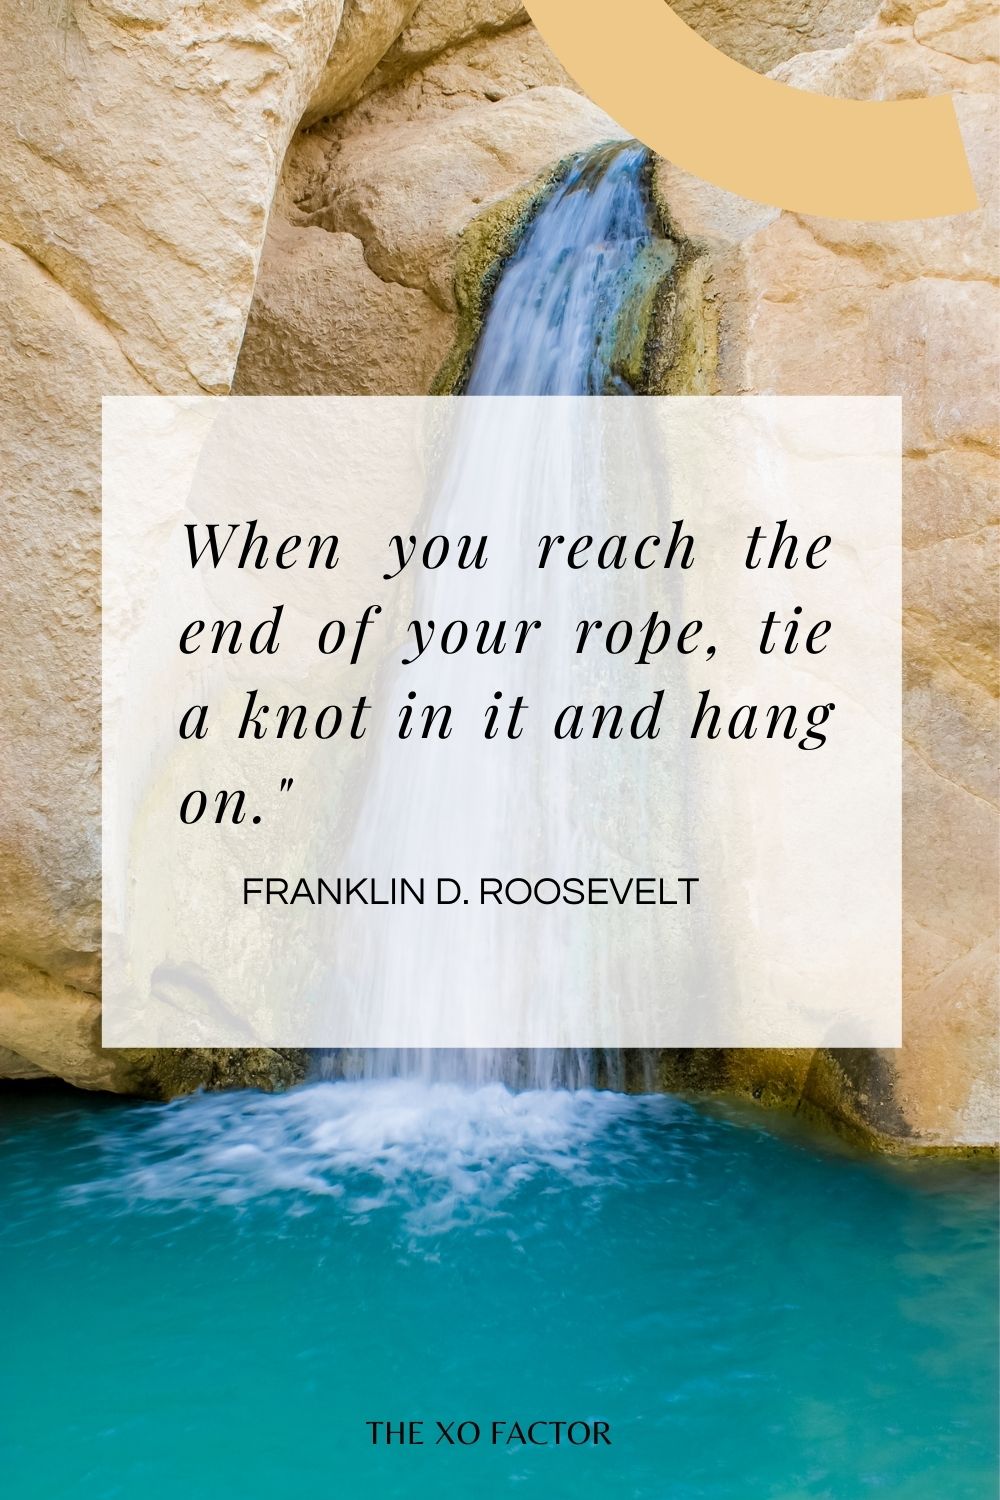 When you reach the end of your rope, tie a knot in it and hang on."  Franklin D. Roosevelt